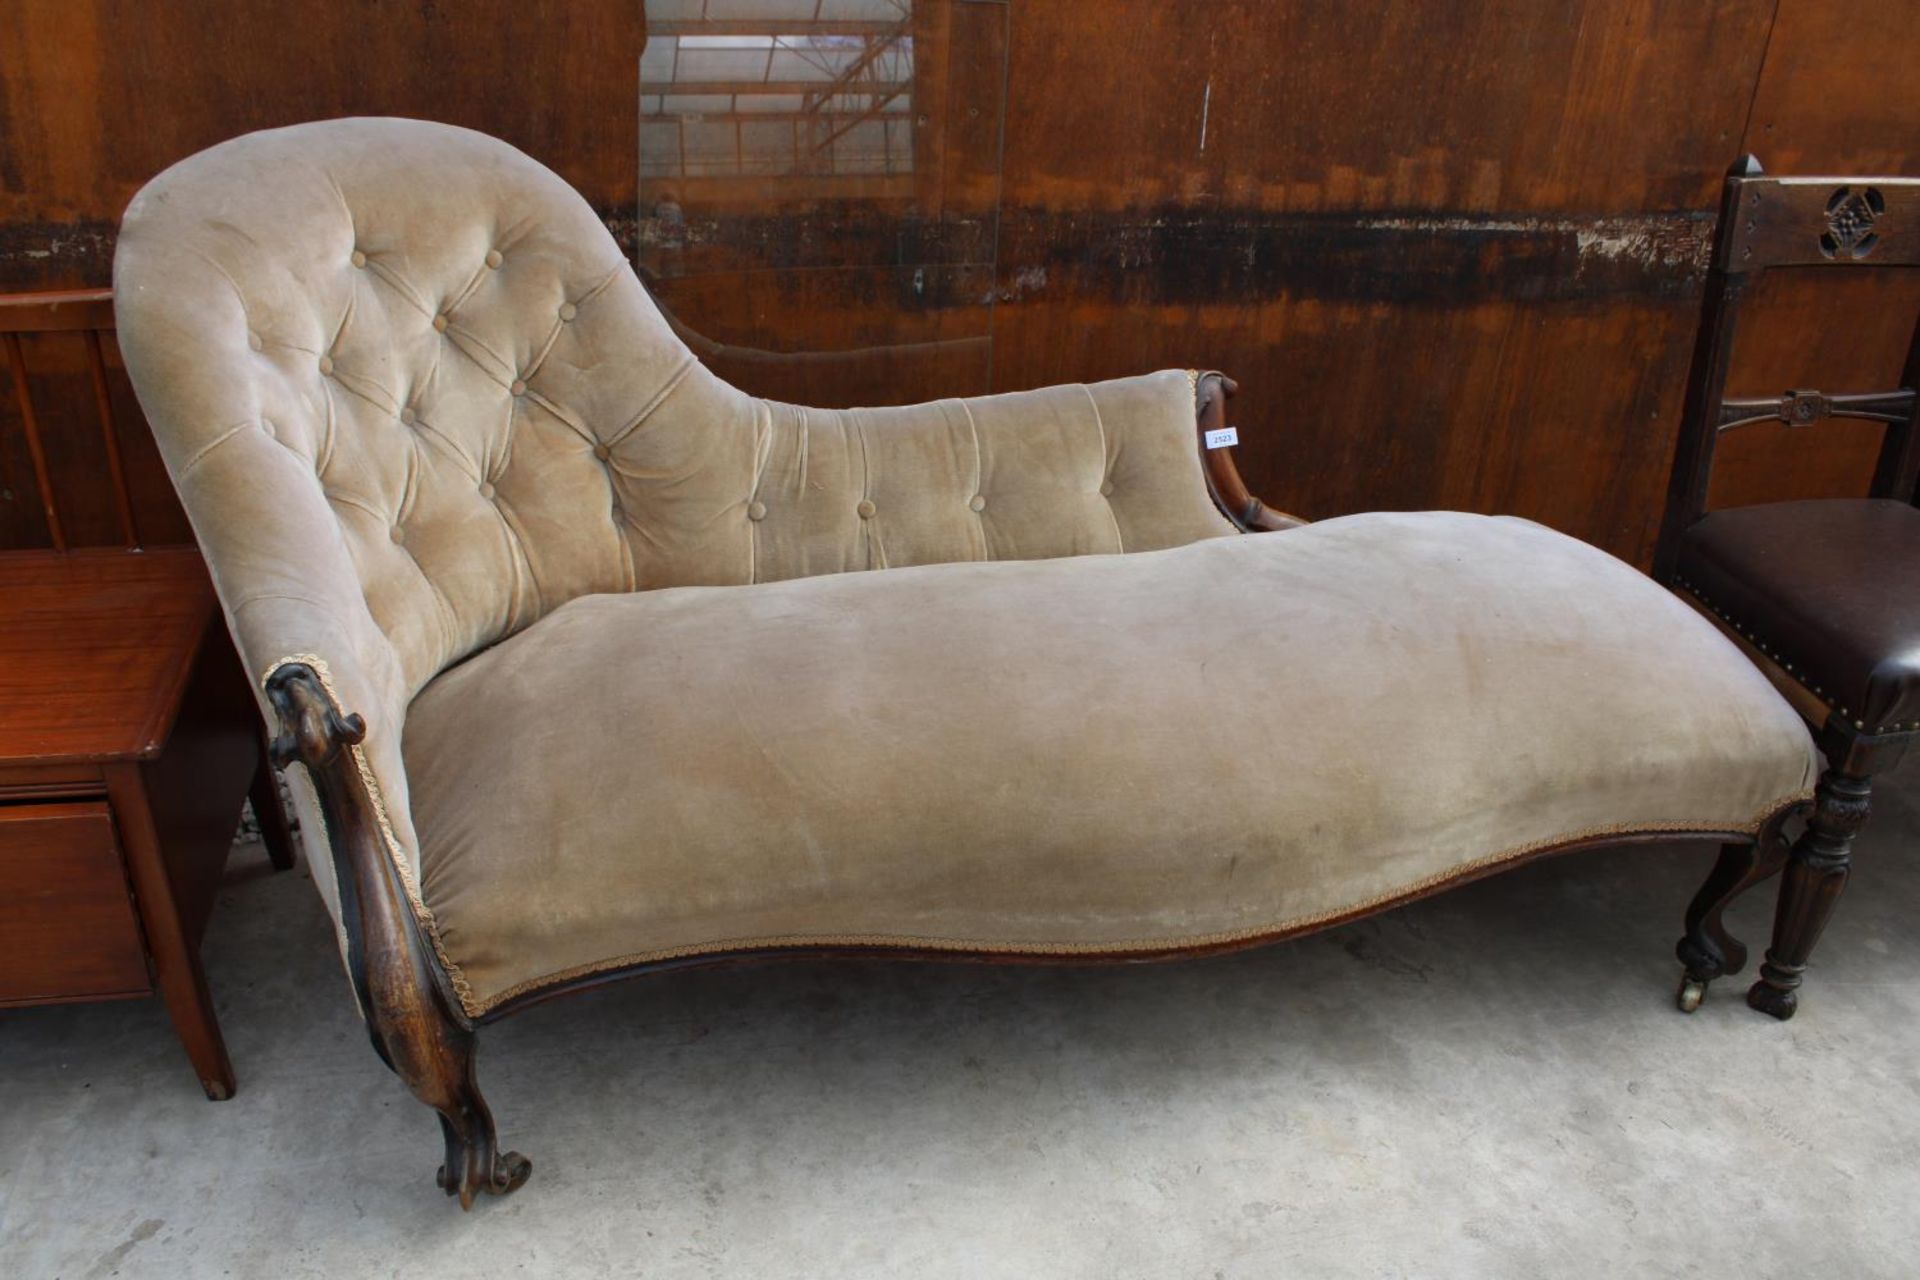 A VICTORIAN MAHOGANY CHAISE LONGUE WITH SCROLL ARM AND LEGS